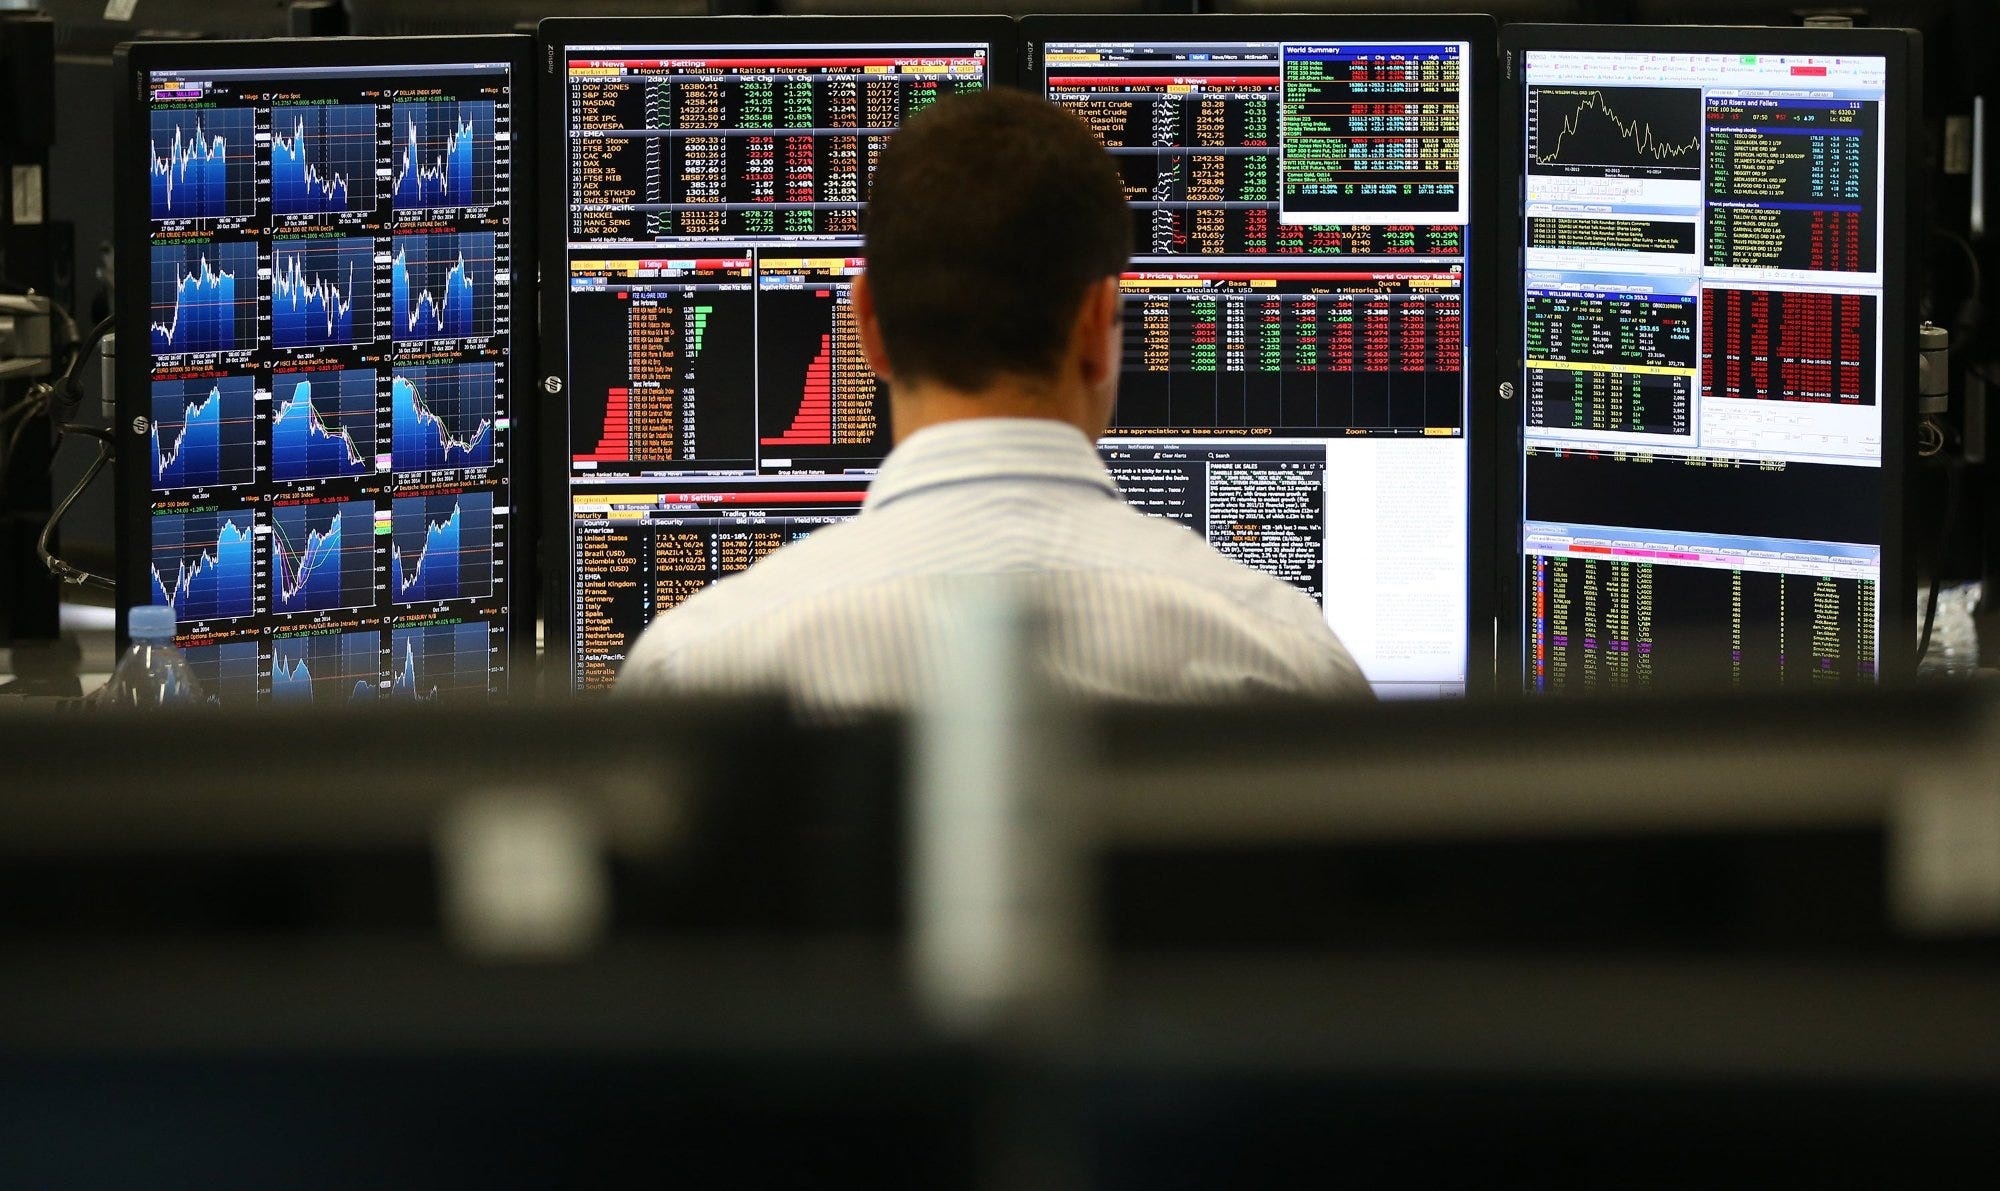 High-frequency trading: how to build and execute successful strategies